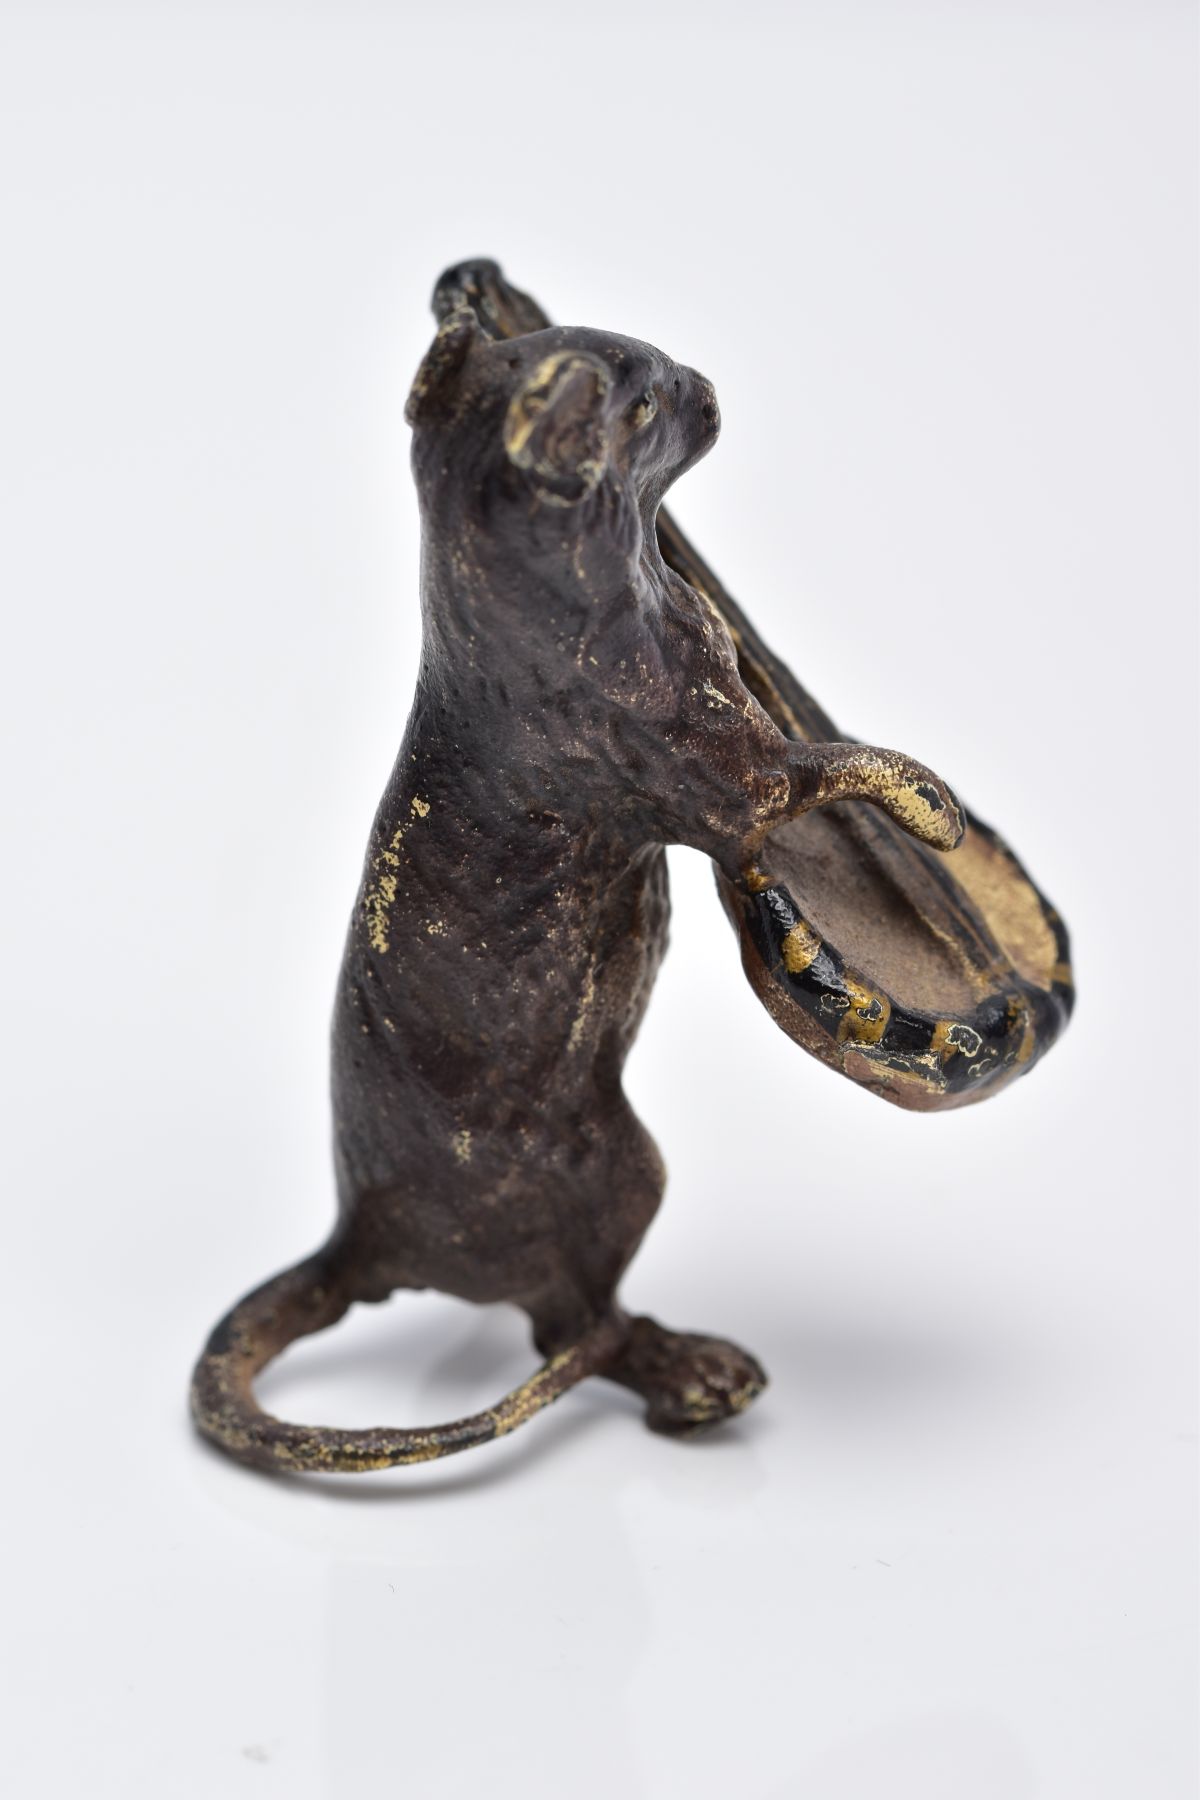 A BERGMAN BRONZE SCULPTURE OF A RAT PLAYING A BANJO, painted bronze figure approximate height 4.5cm, - Image 3 of 4